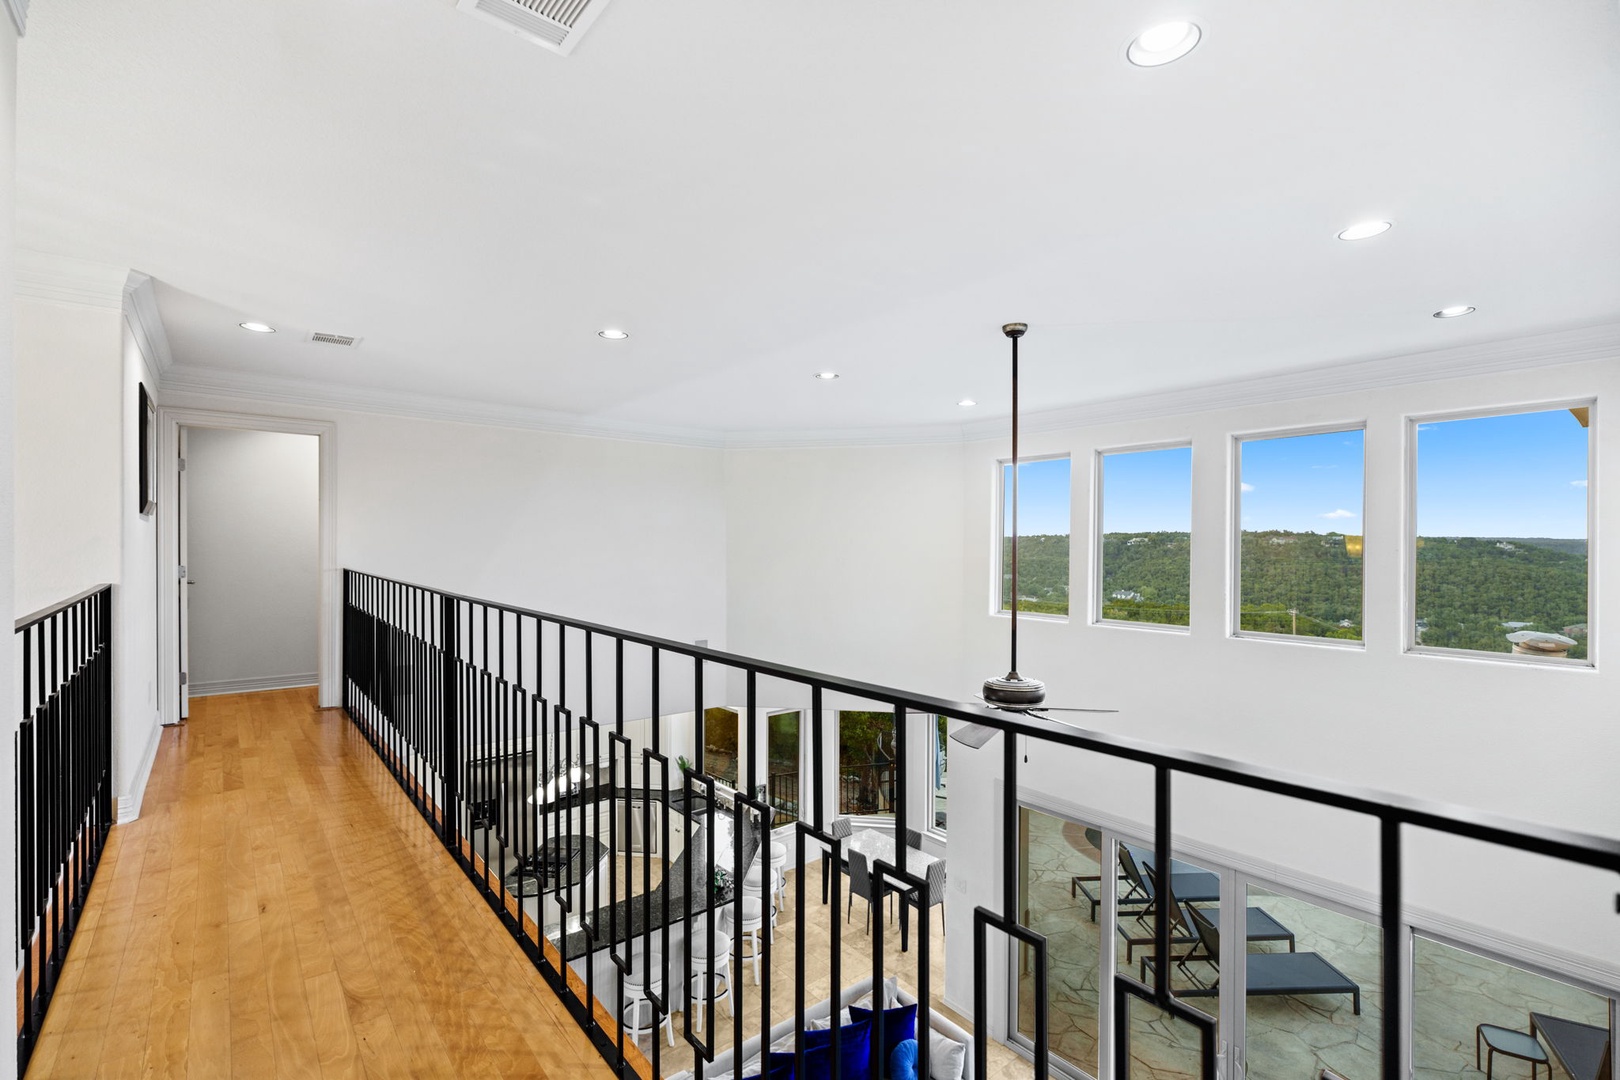 This home’s gorgeous views are visible even from the 2nd level catwalk